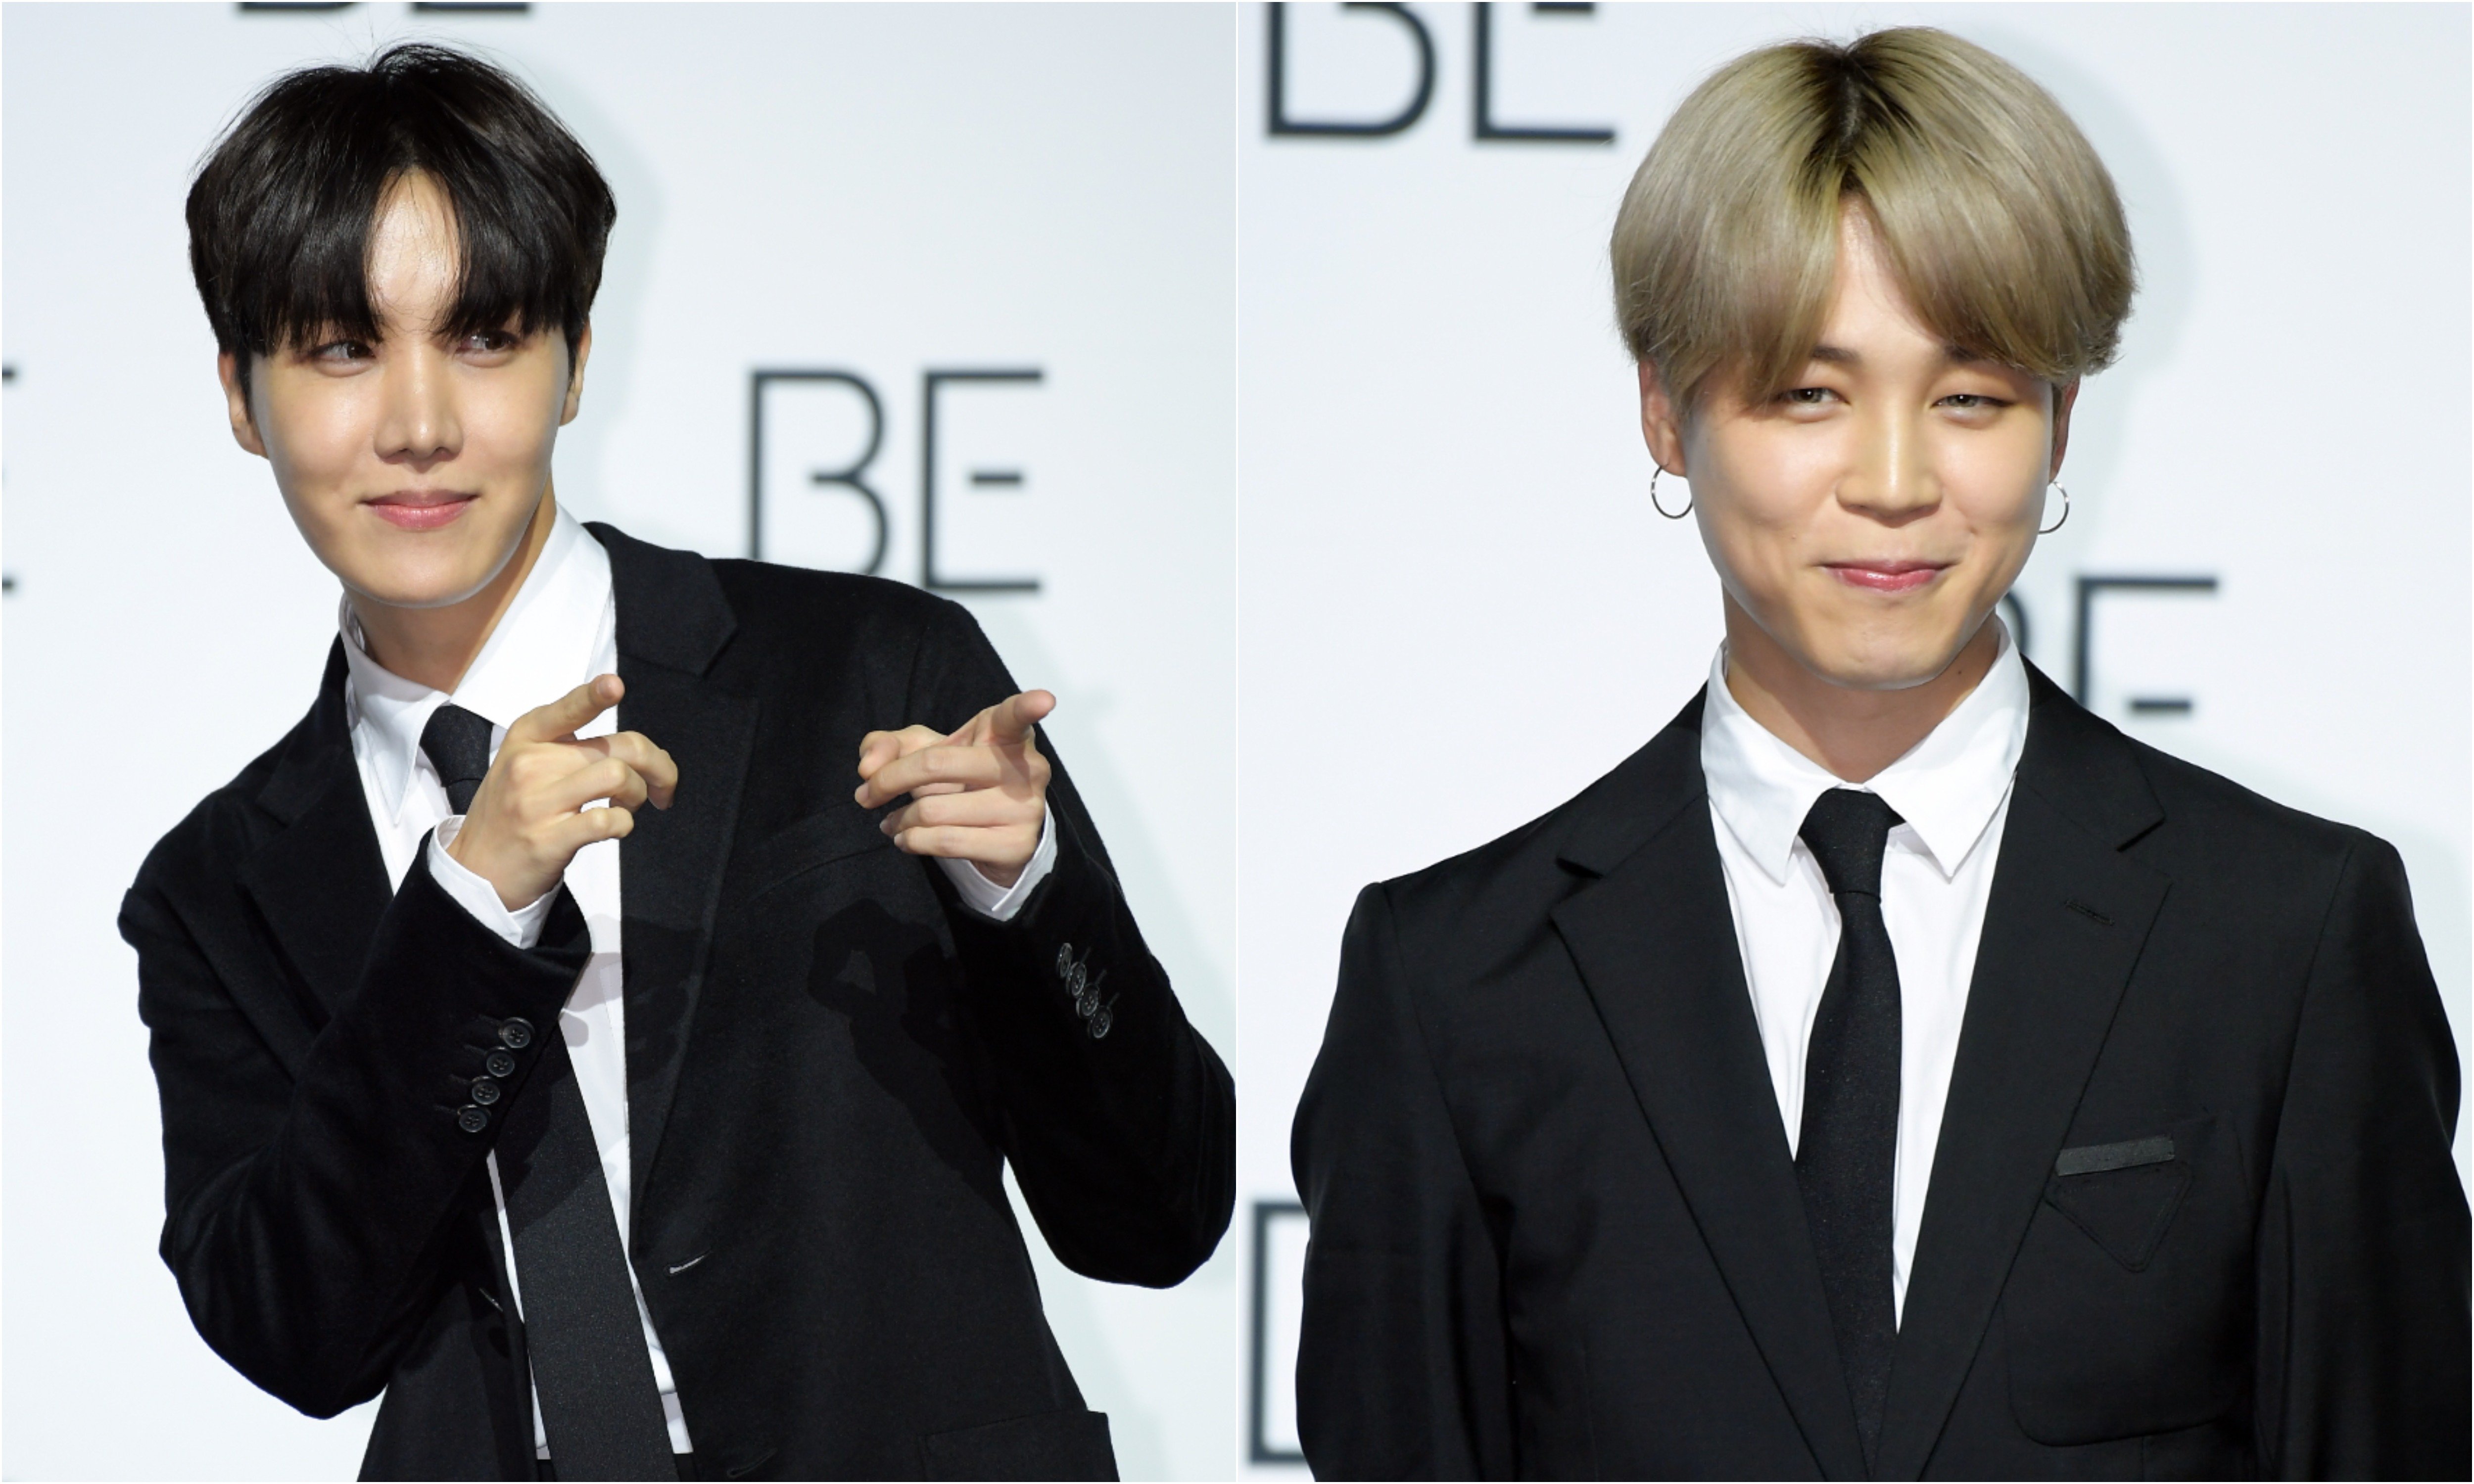 J-Hope Joins His BTS Bandmates Jimin, Suga And RM In A Special